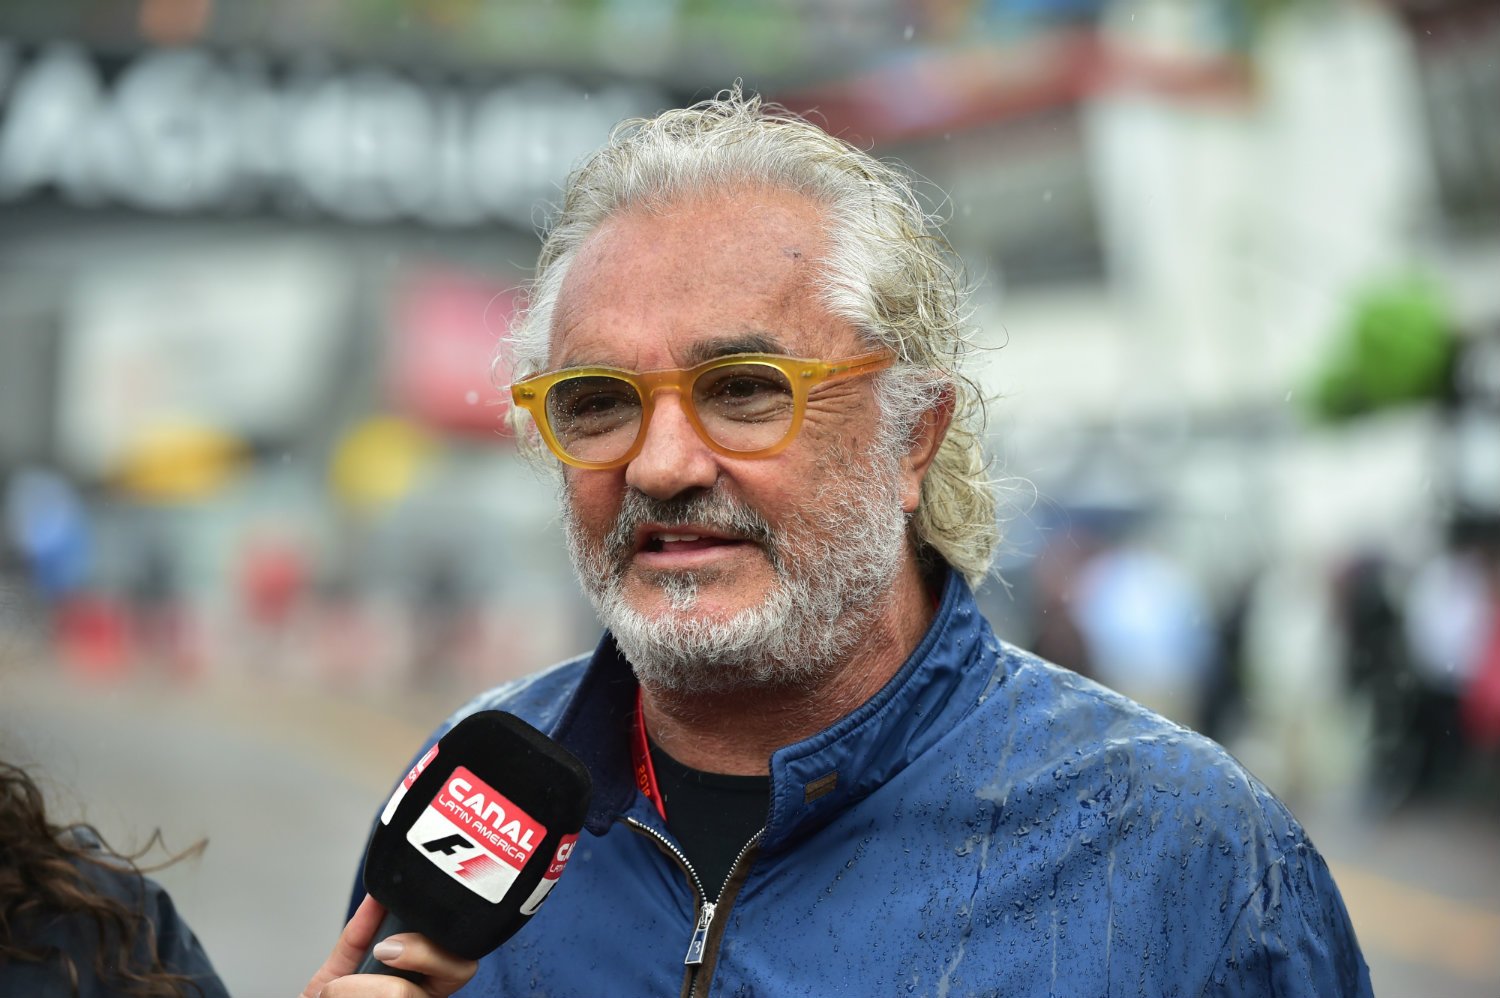 Former Renault F1 boss Flavio Briatore gets 18-month sentence for tax fraud  - The Local